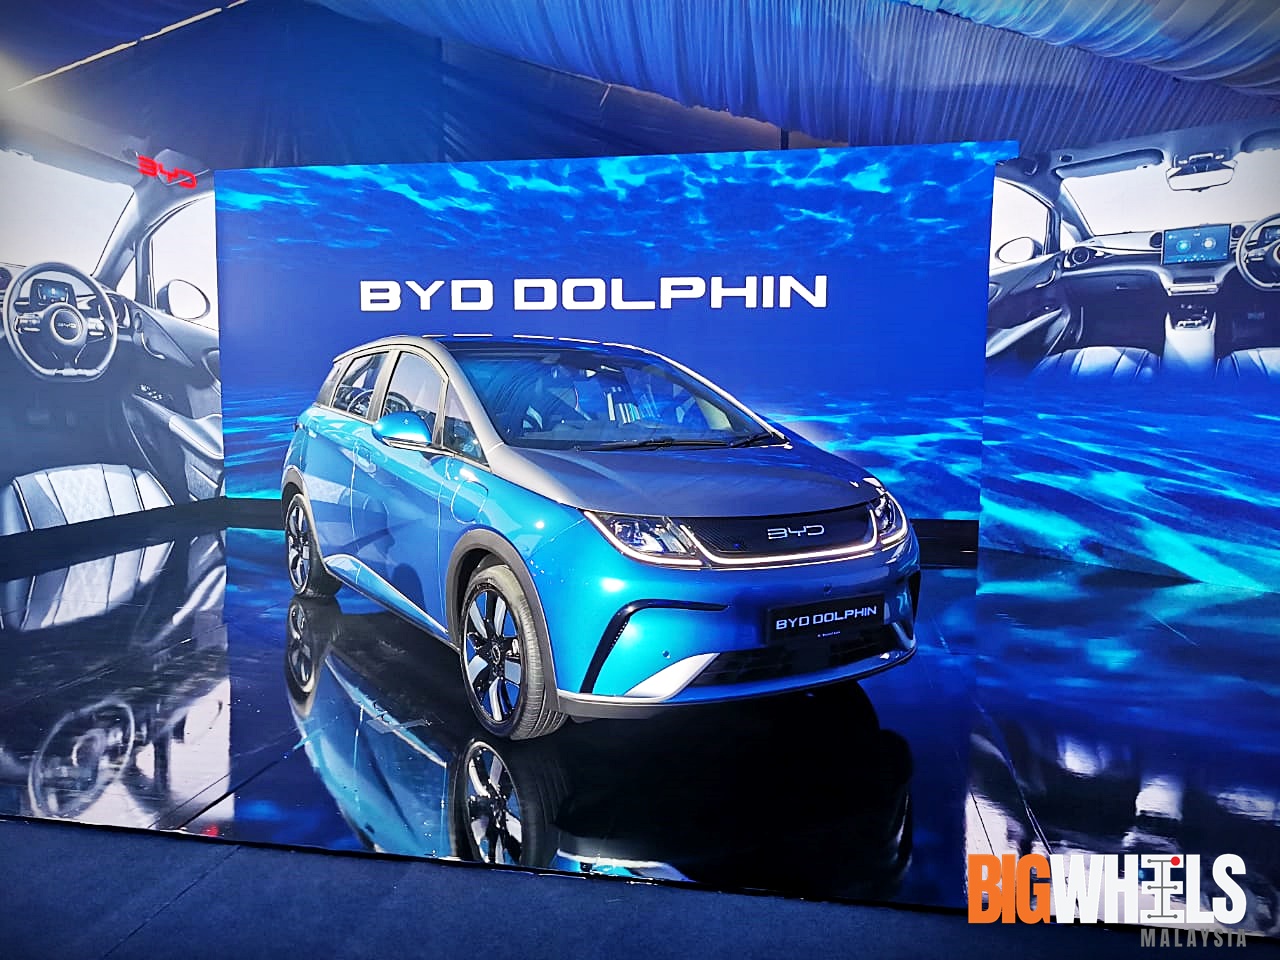 BYD is world’s first manufacturer to produce 5 million NEVs